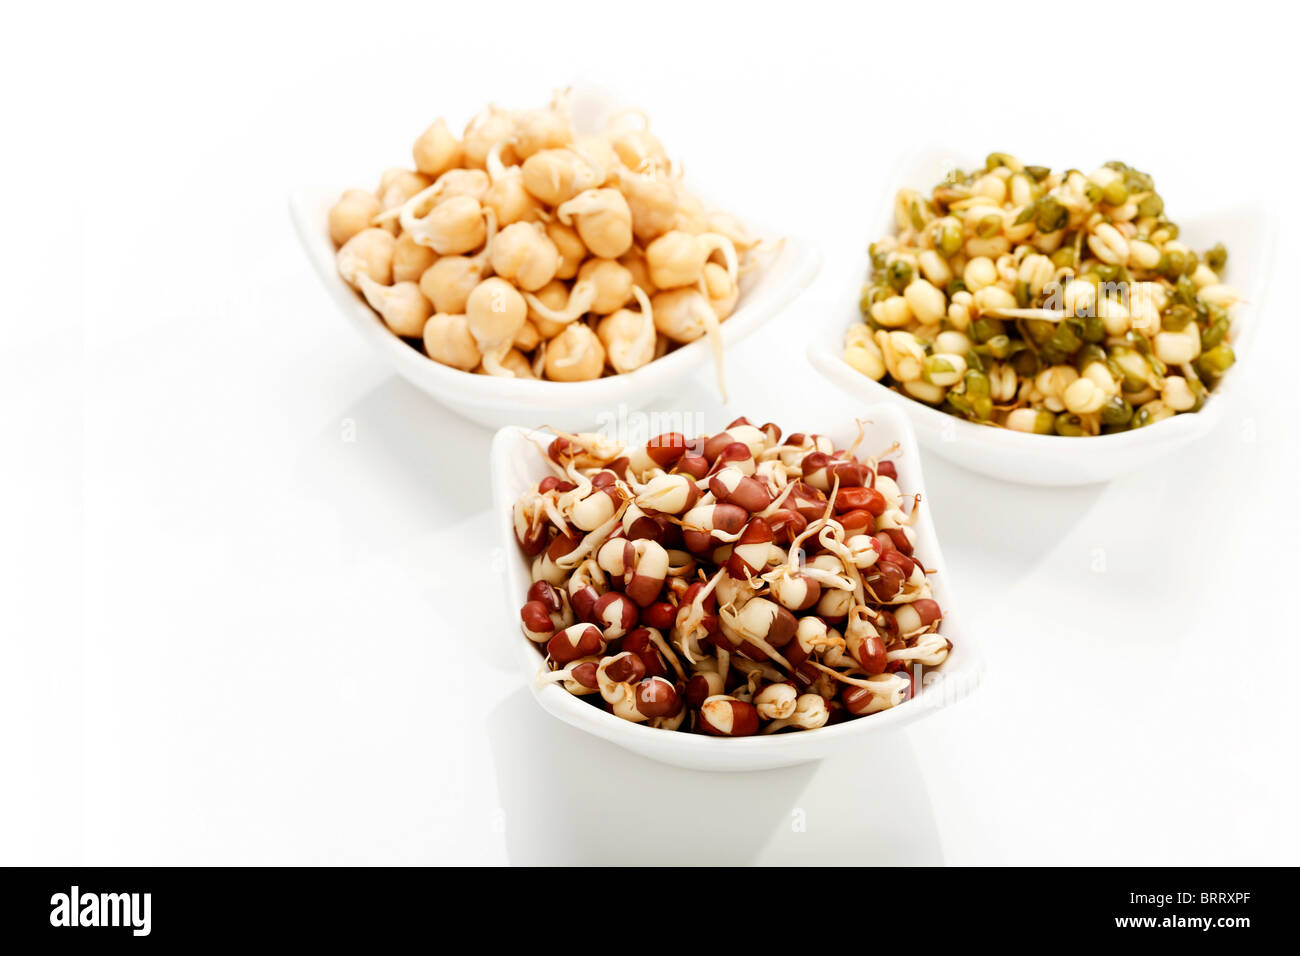 Chick pea, mung bean and azuki bean sprouts Stock Photo